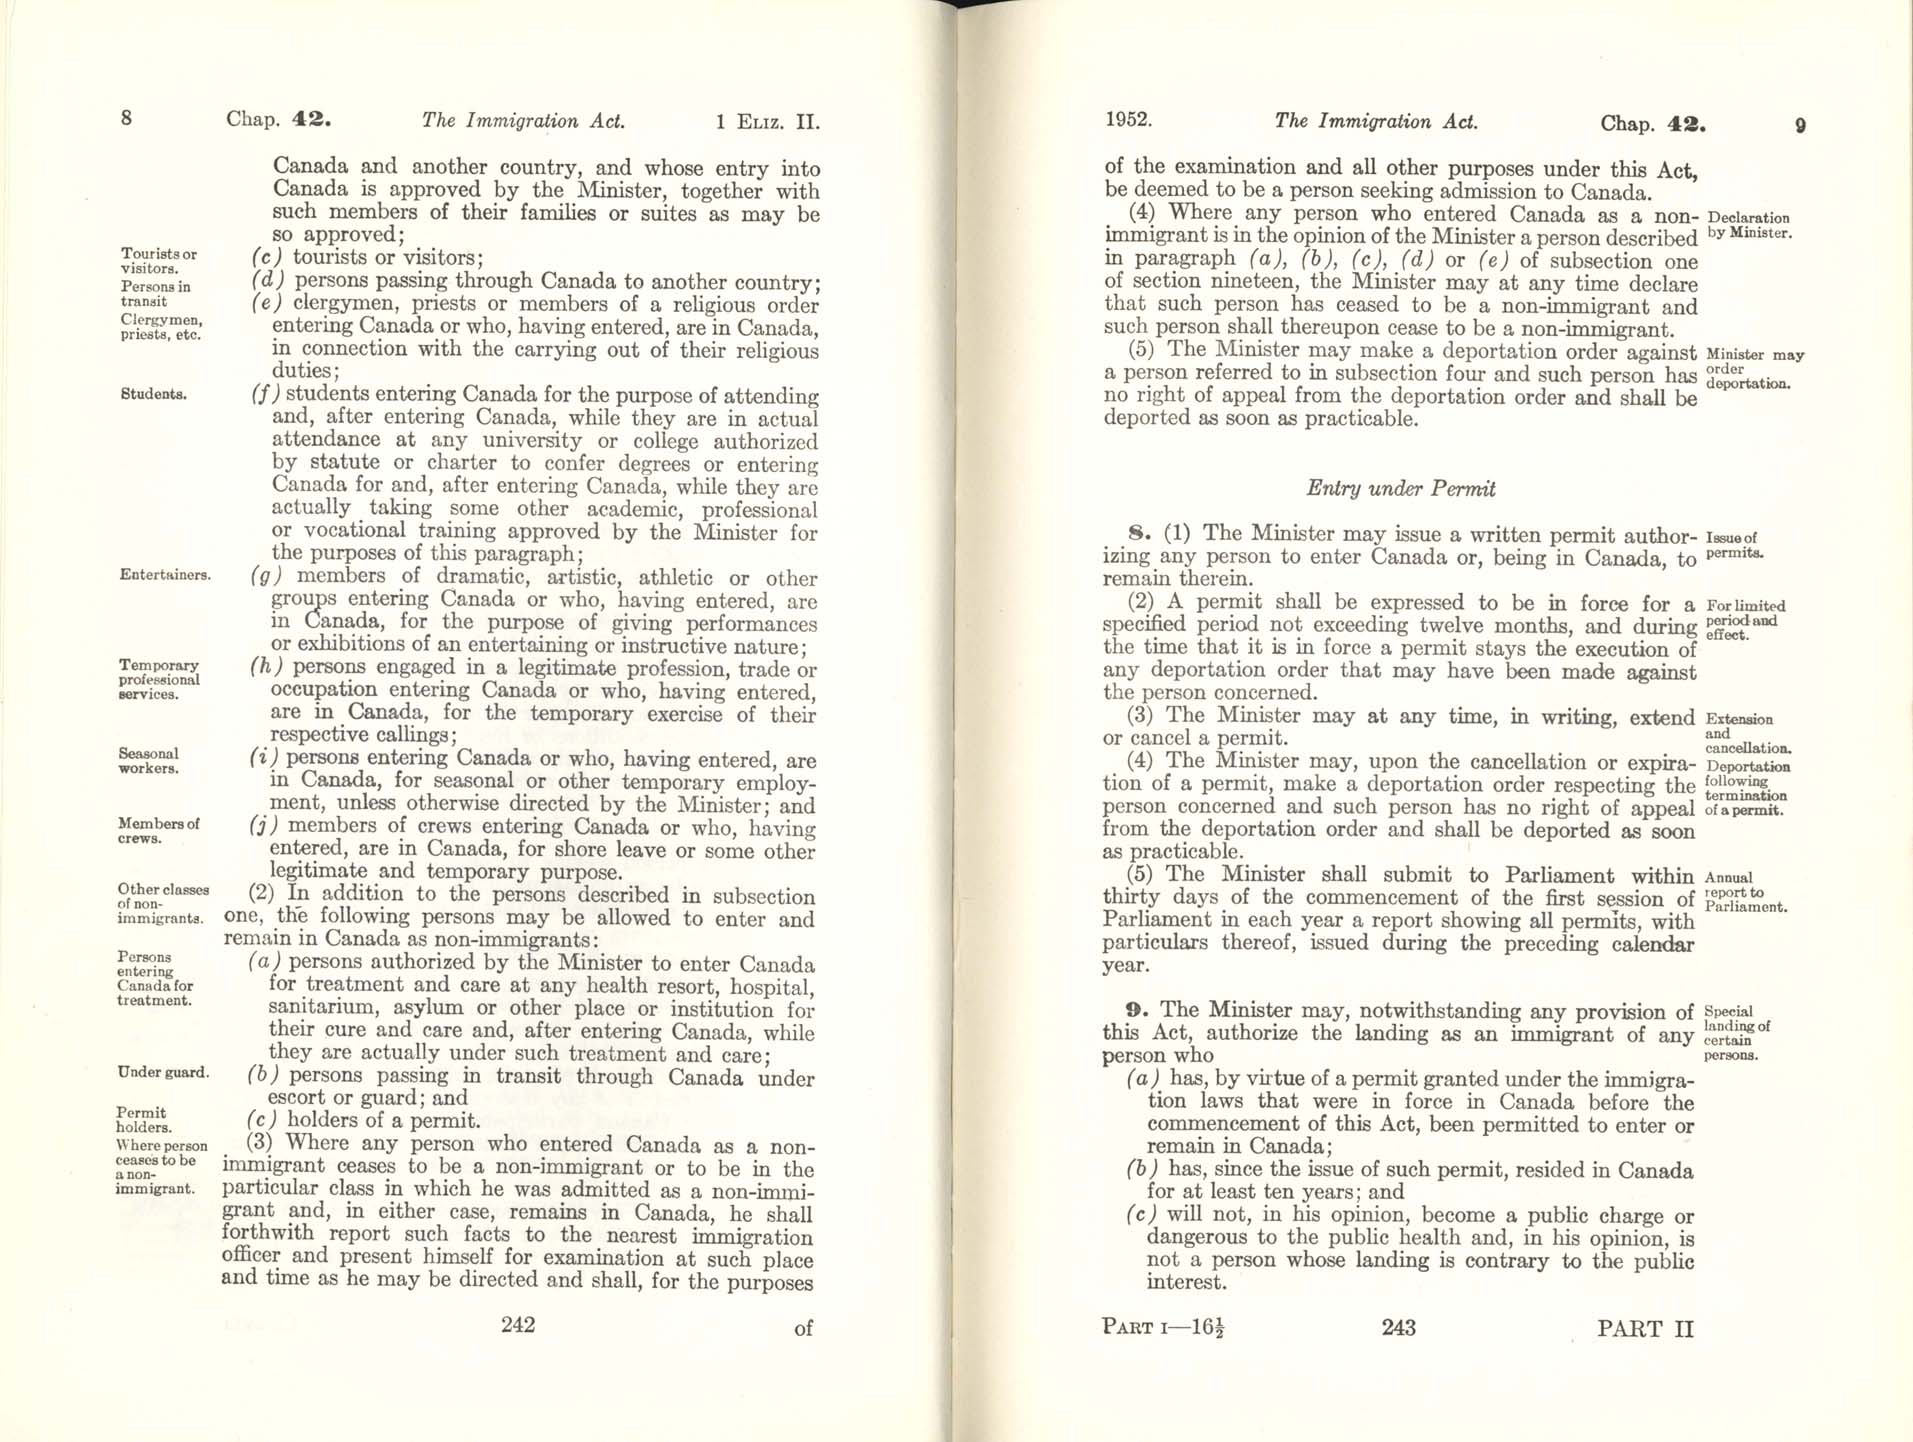 CHAP 42 Page 242, 243 Immigration Act, 1952